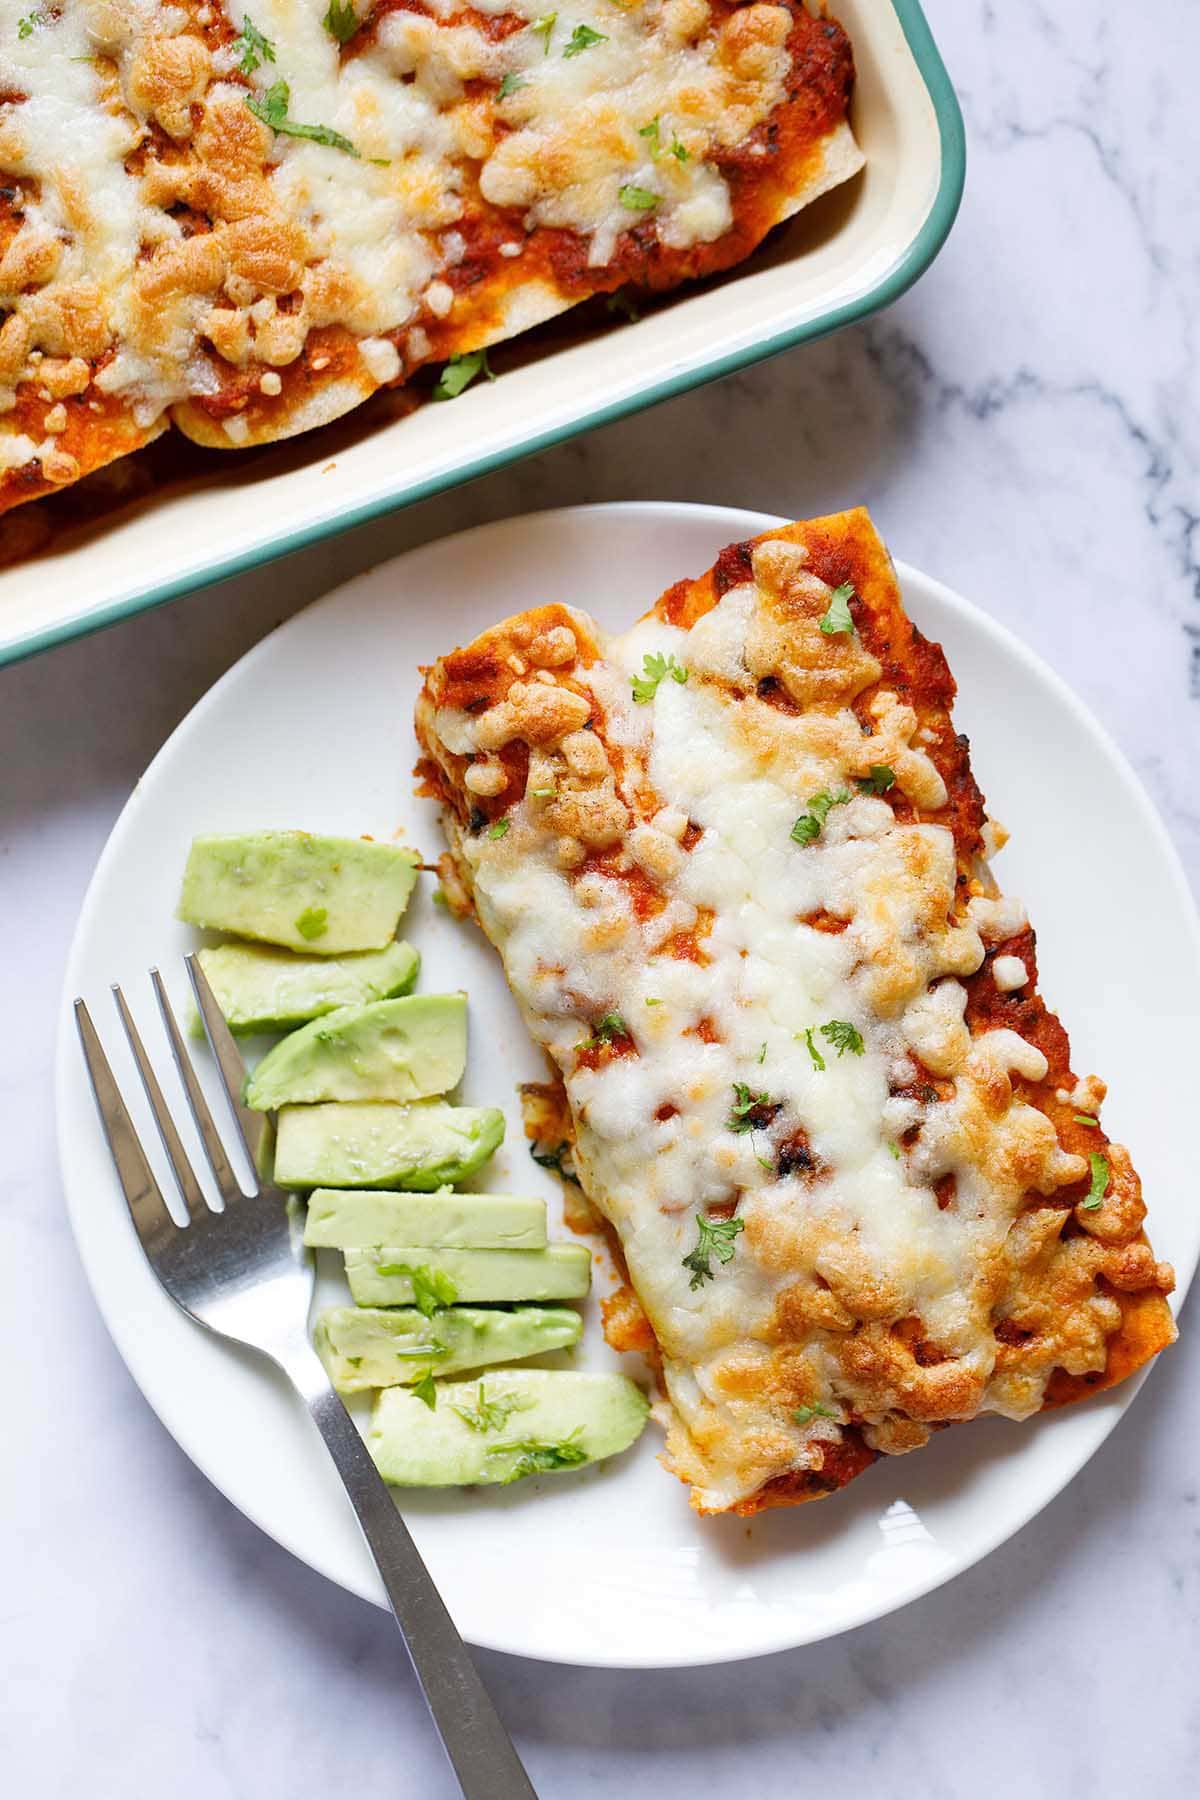 enchilada on a white plate with sliced avocado and fork by side.